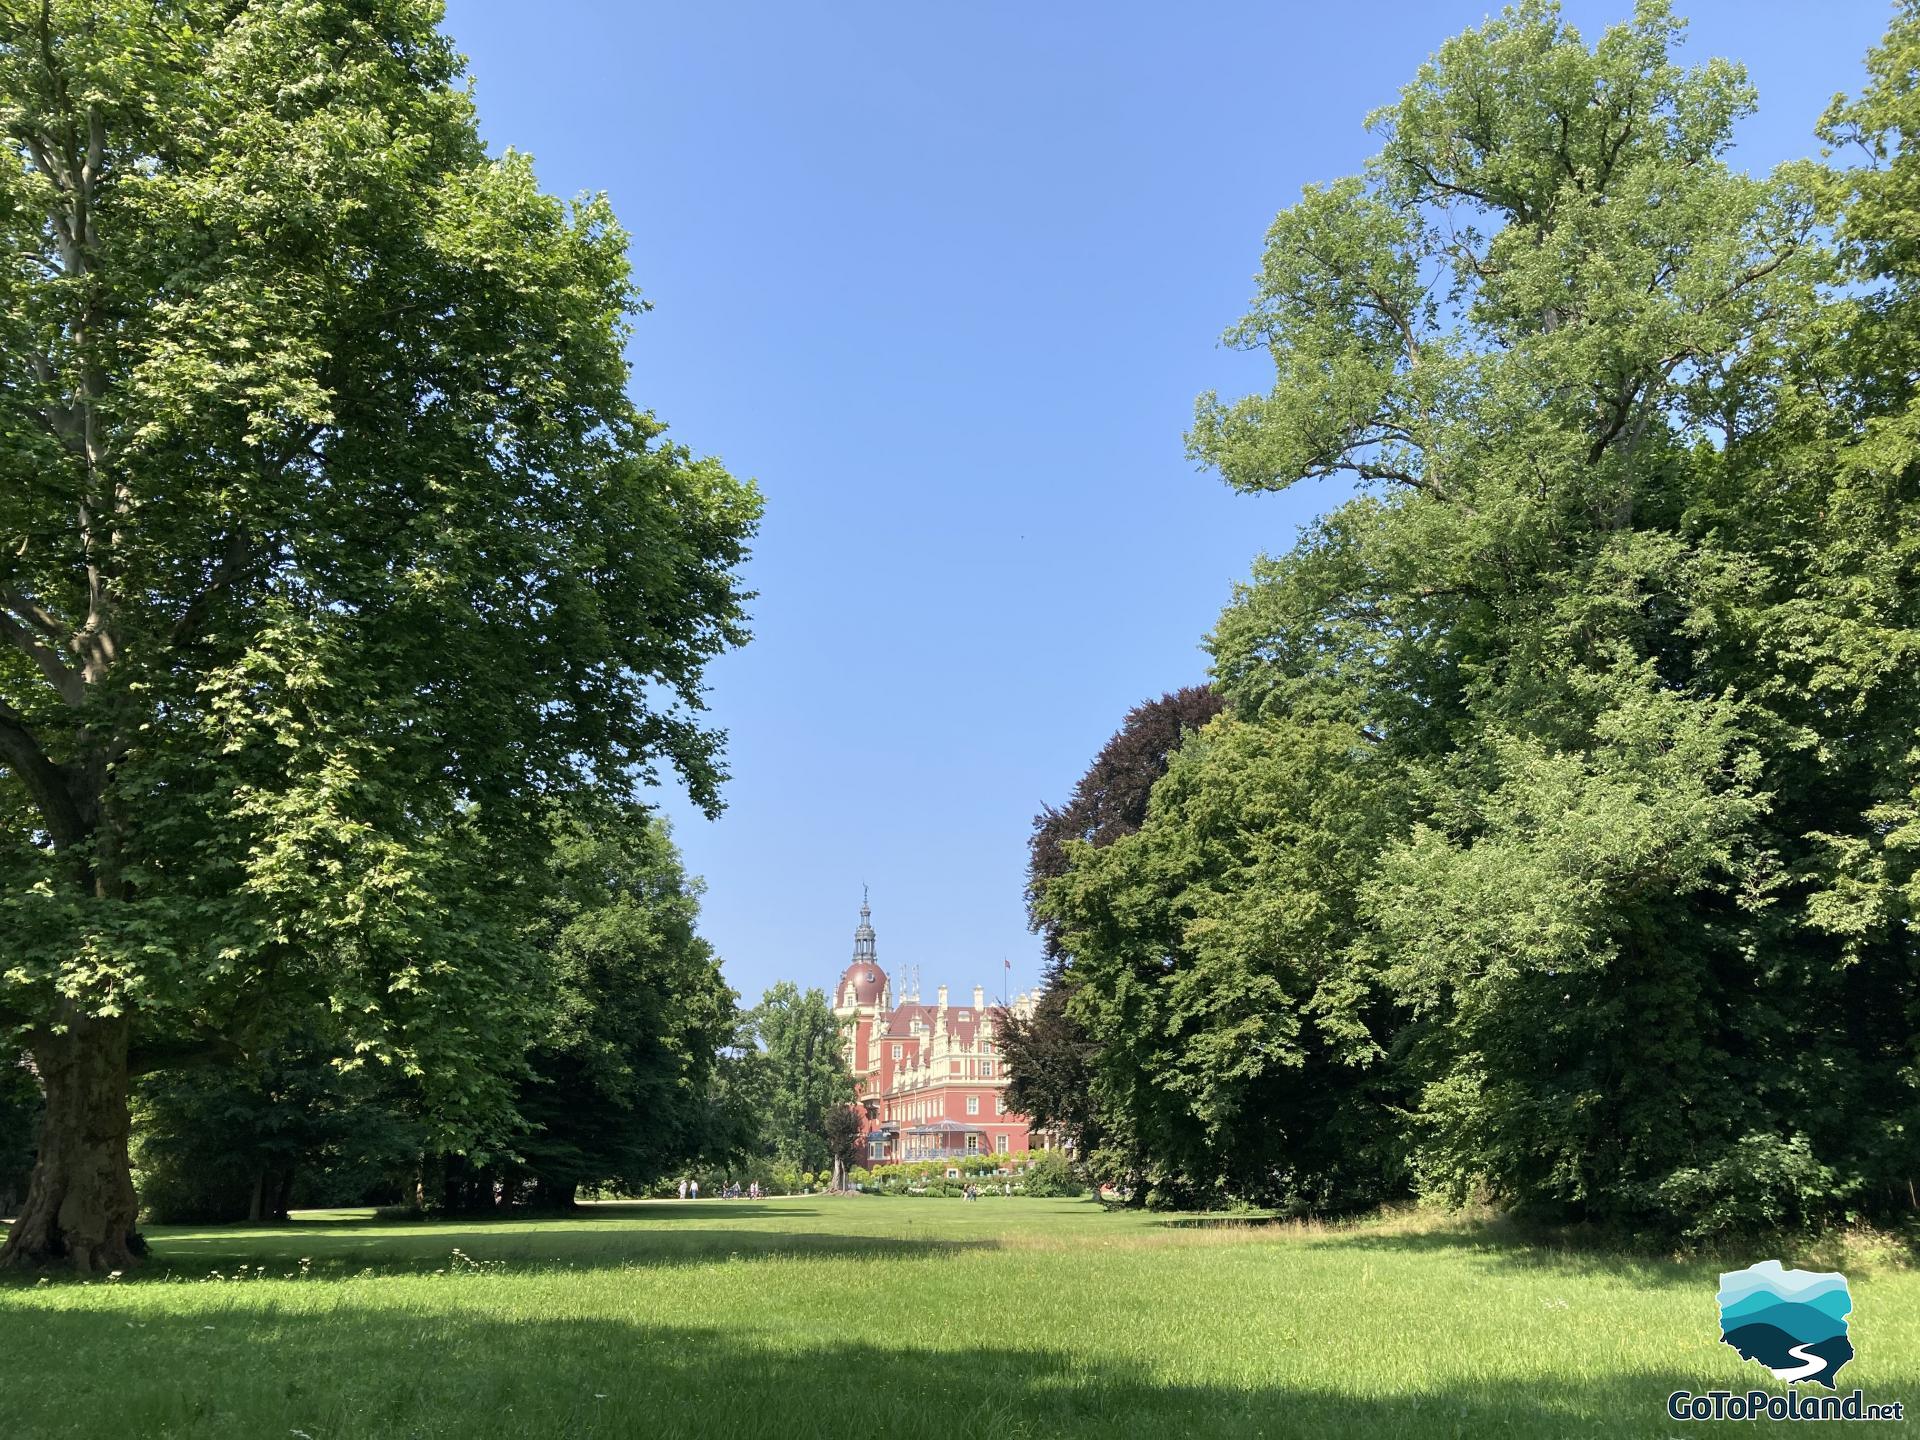 The Renaissance castle emerges from behind the trees